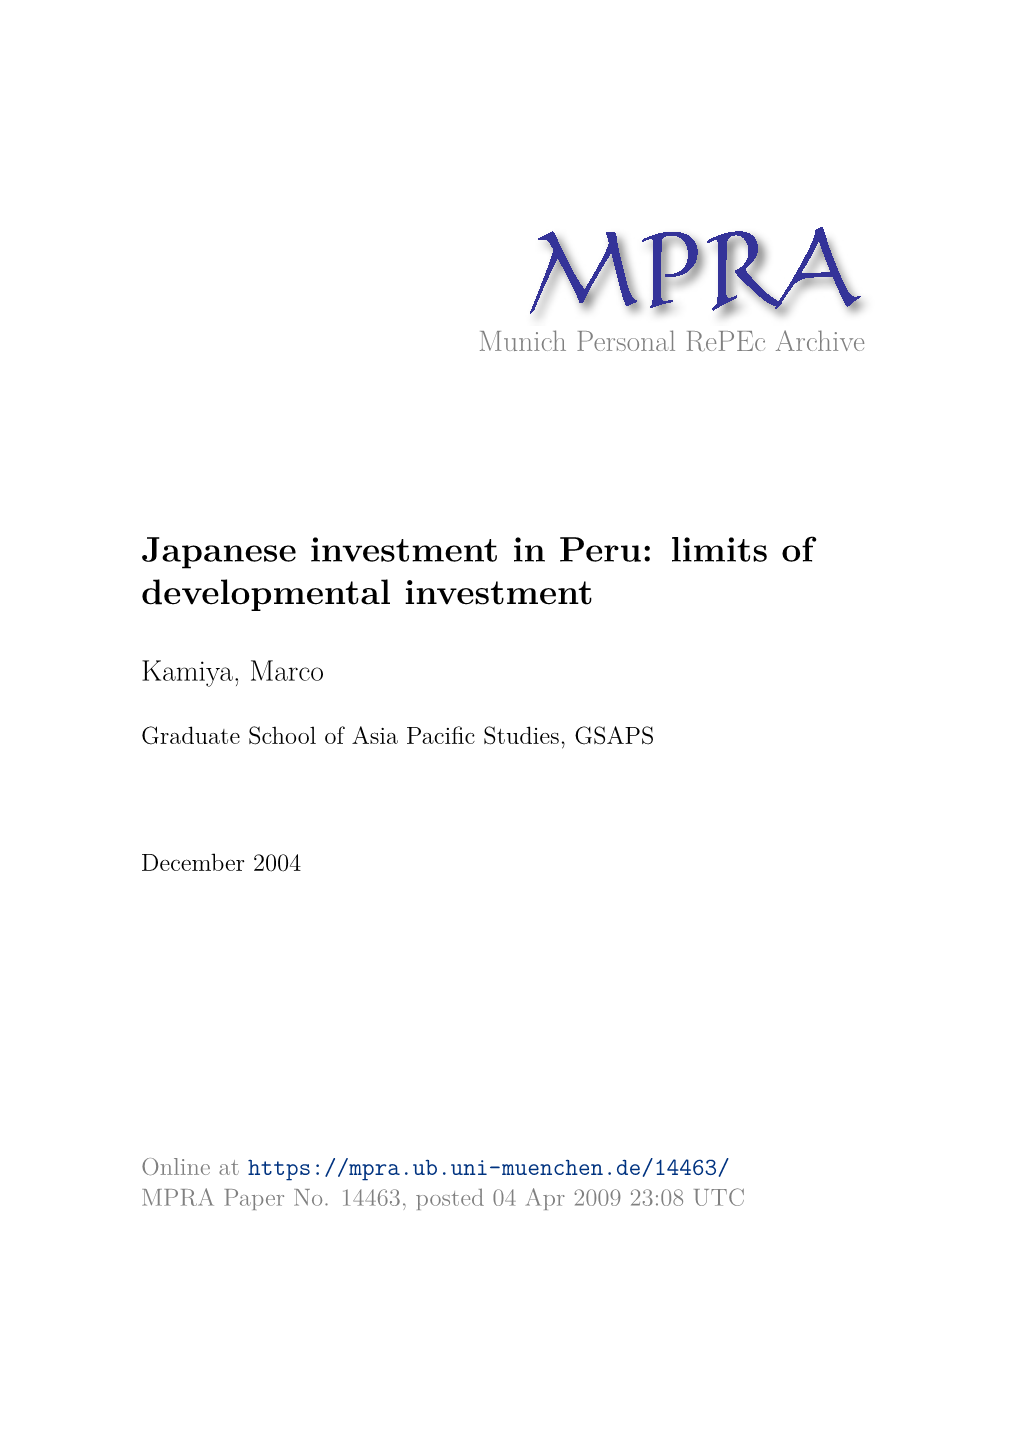 Japanese Investment in Peru: Limits of Developmental Investment